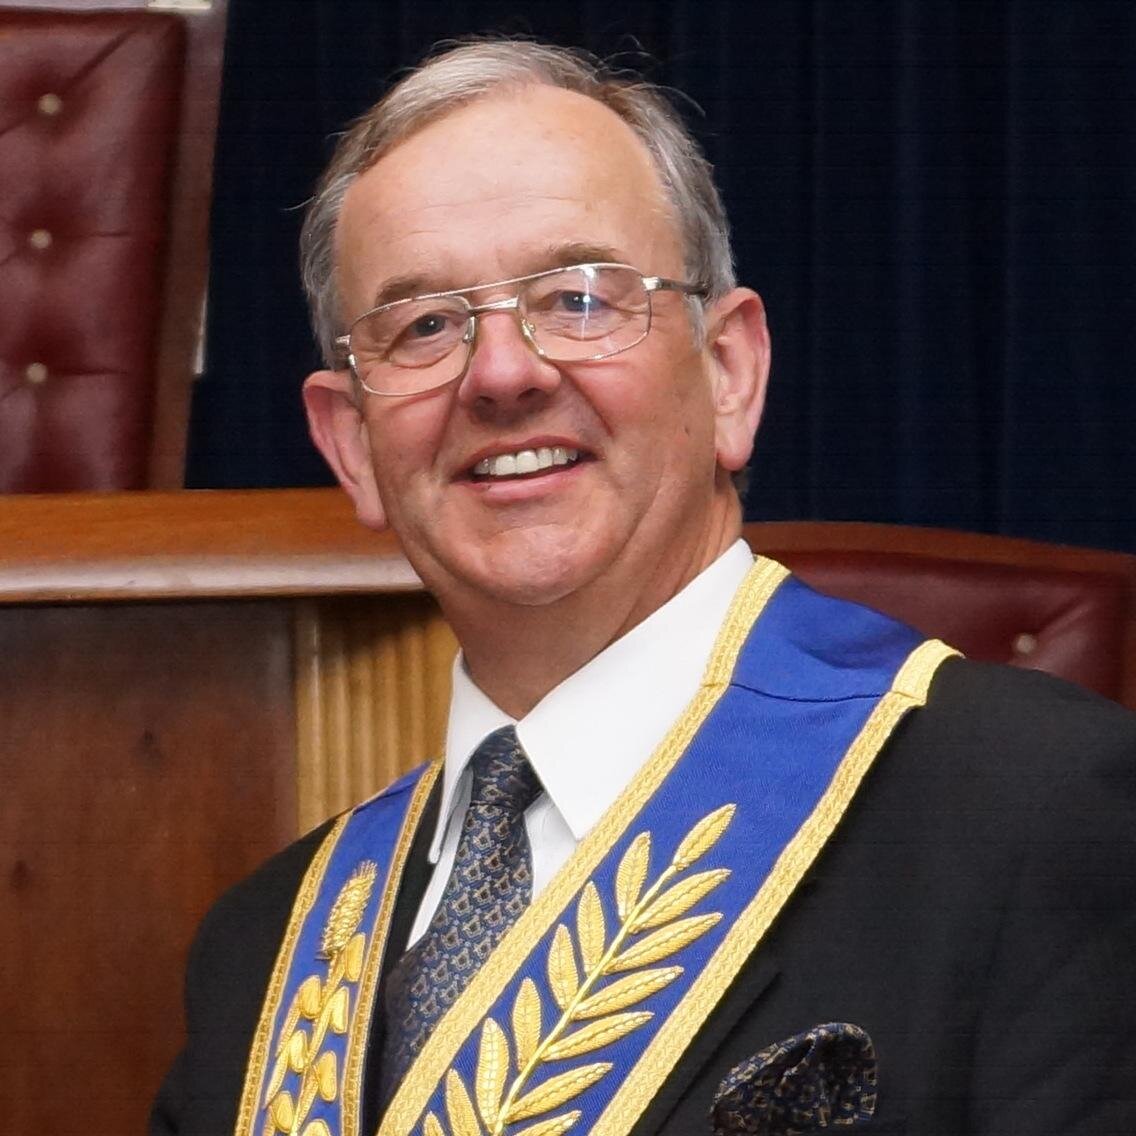 Retired,OPM Old Boy, Devonshire Freemason PAGDC, OPM Lodge No 6279, News, Reports and Photographer (media team) for the Provincial Grand Lodge of Devonshire